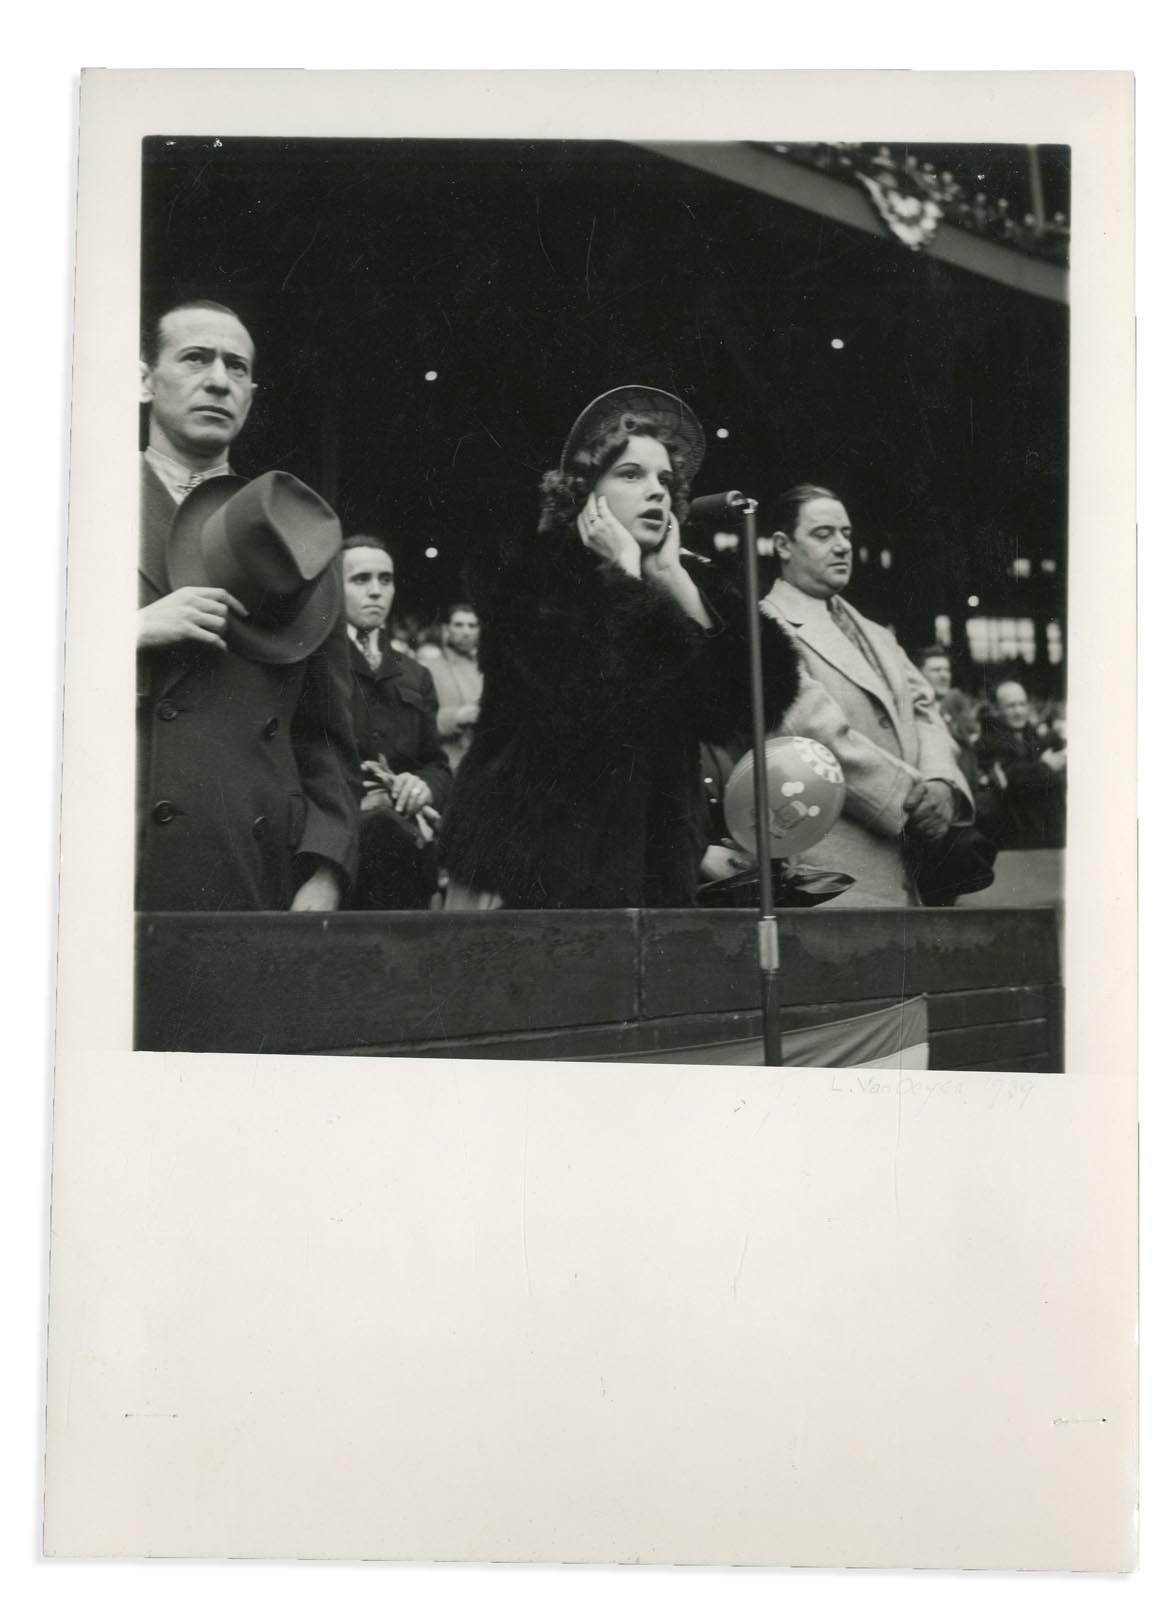 Rock And Pop Culture - 1939 Judy Garland Singing National Anthem Opening Day Cleveland Stadium by Louis Van Oeyen